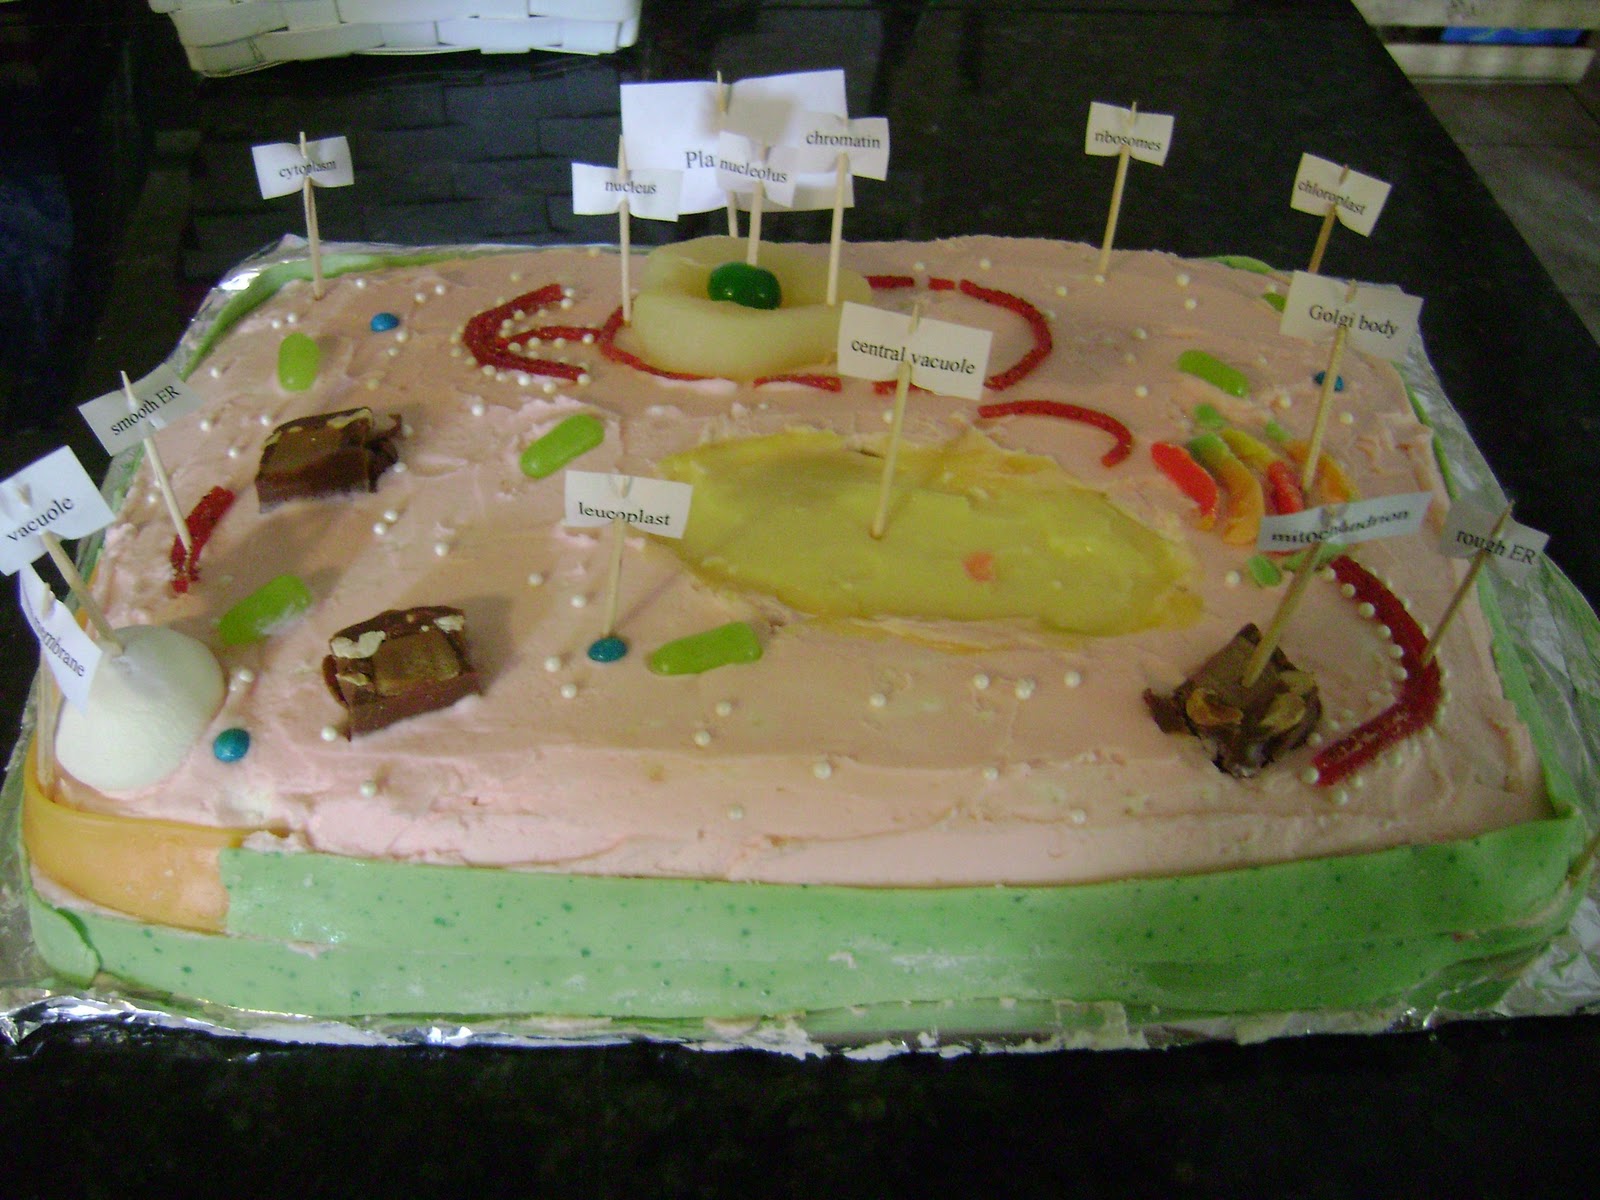 The Sojourner Edible Cell Project